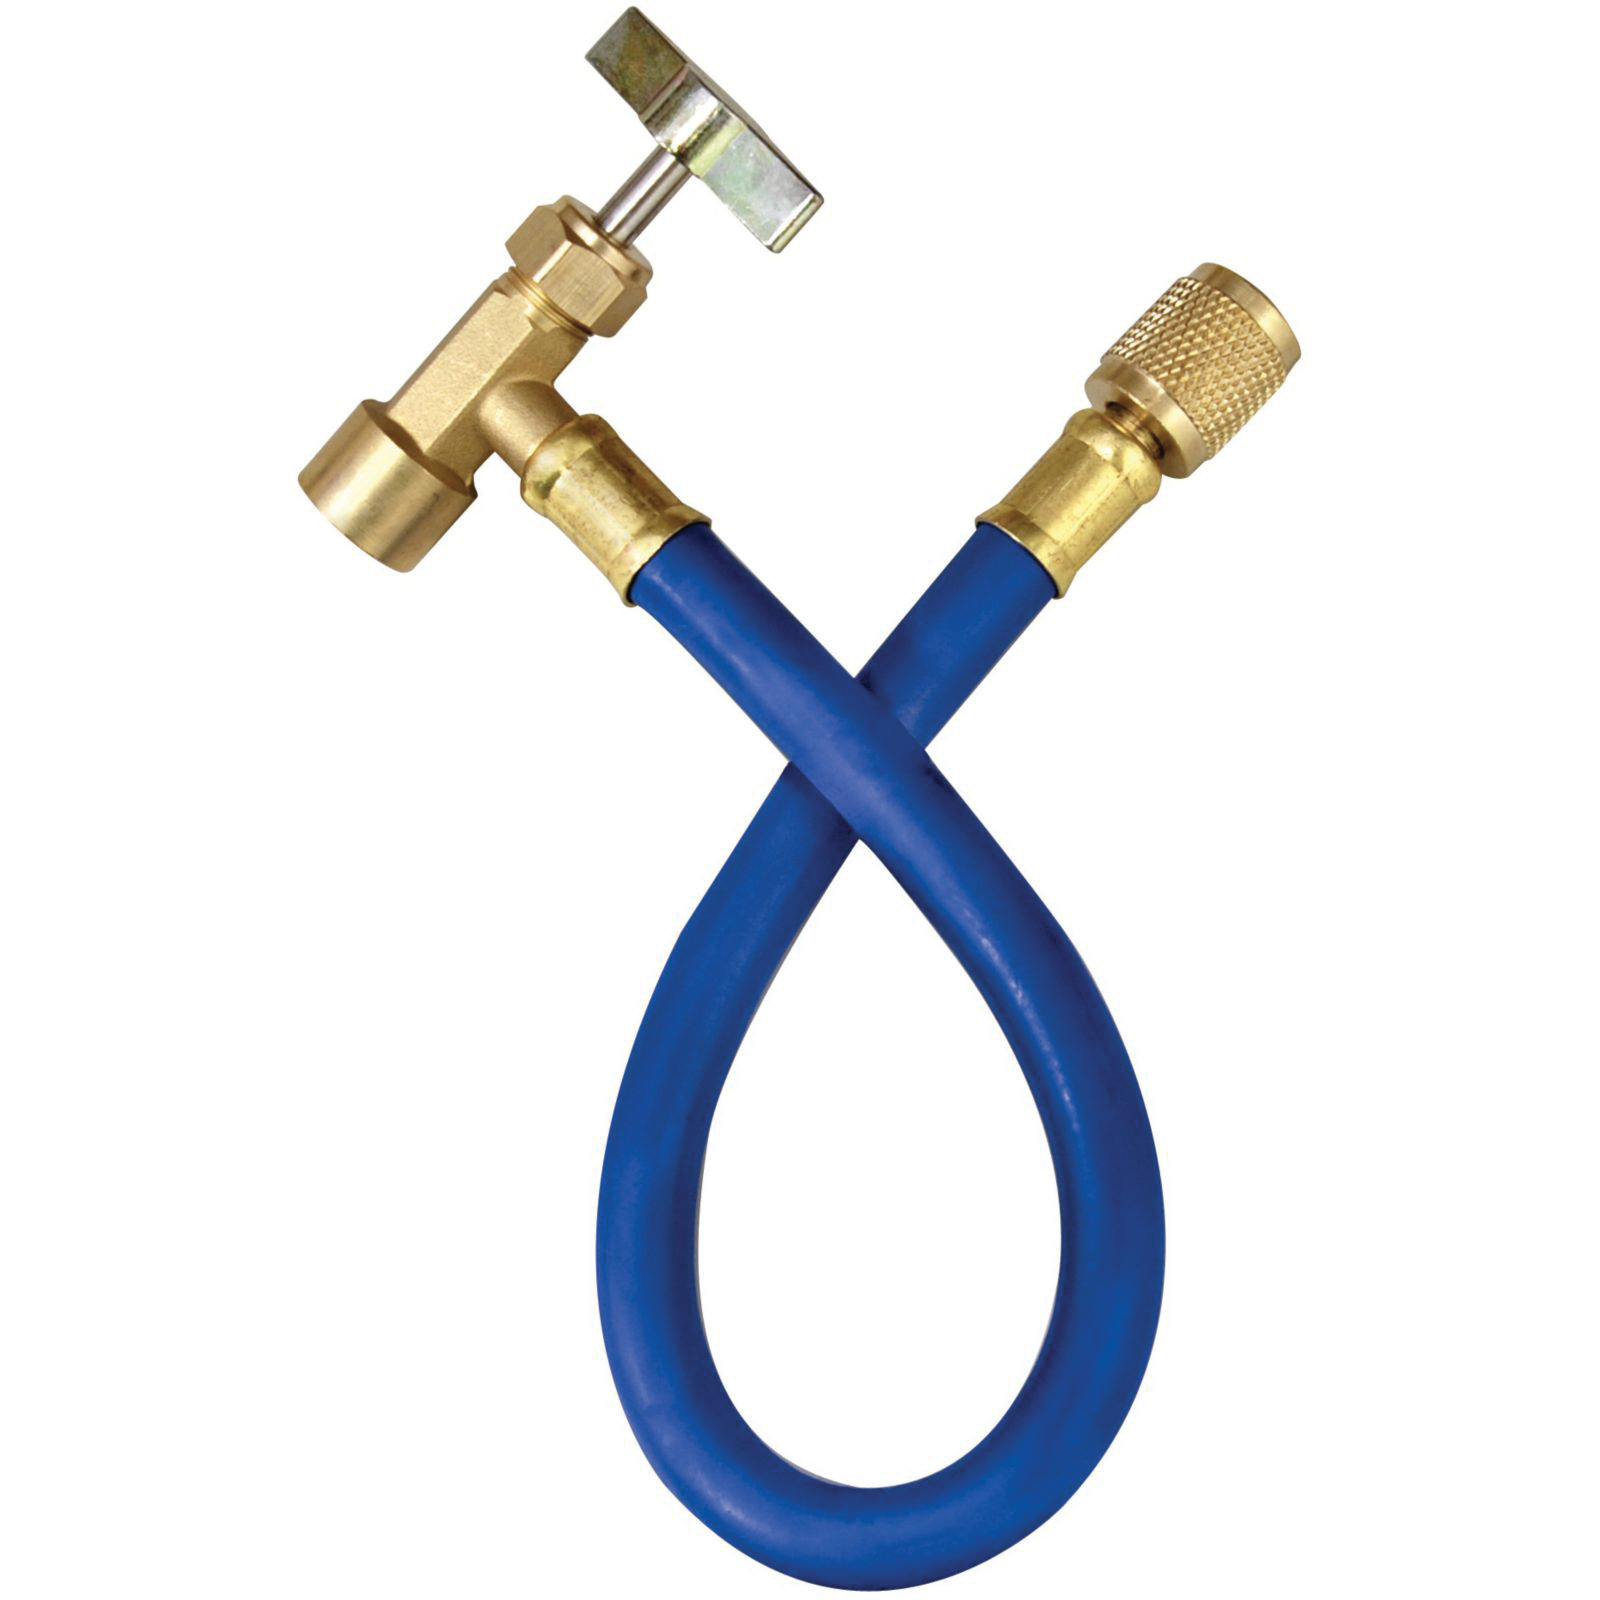 Nu-Calgon 4051-99 A/C Piercing Valve and Hose, 1/4 in Nominal, Flared Connection